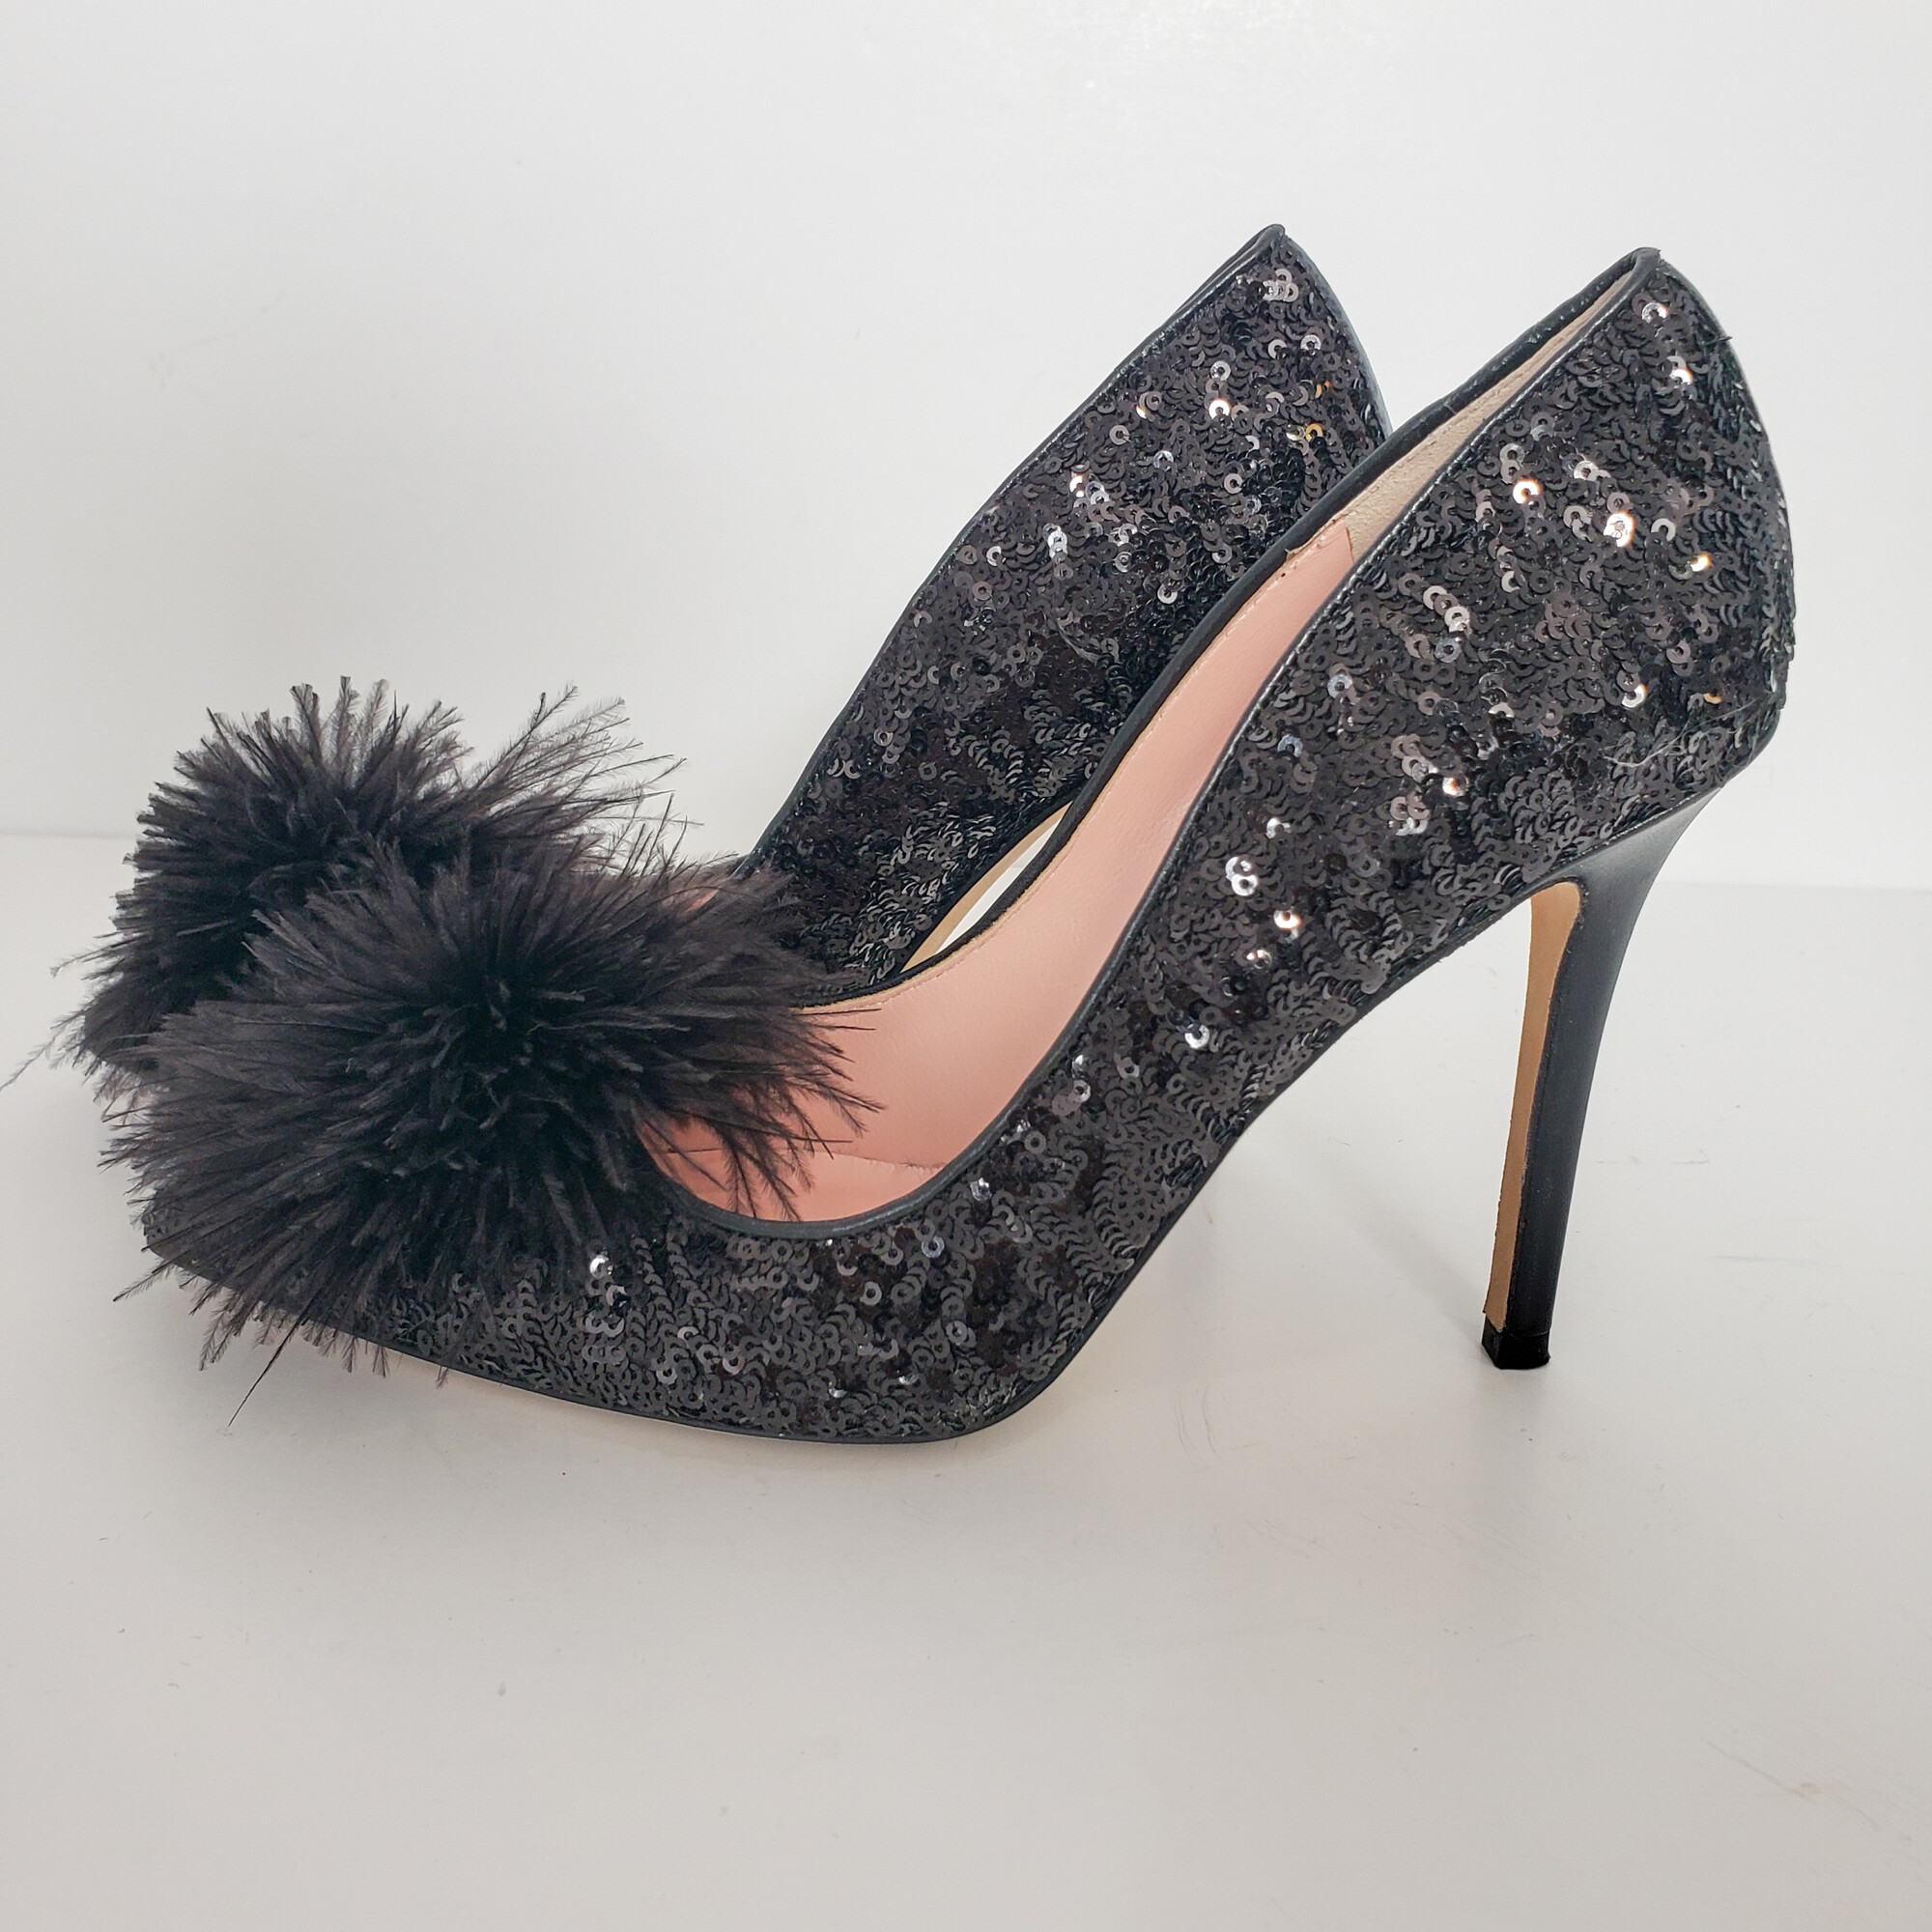 Kate Spade
Black Sequin Heel w Furry pom on the front
Size: 7